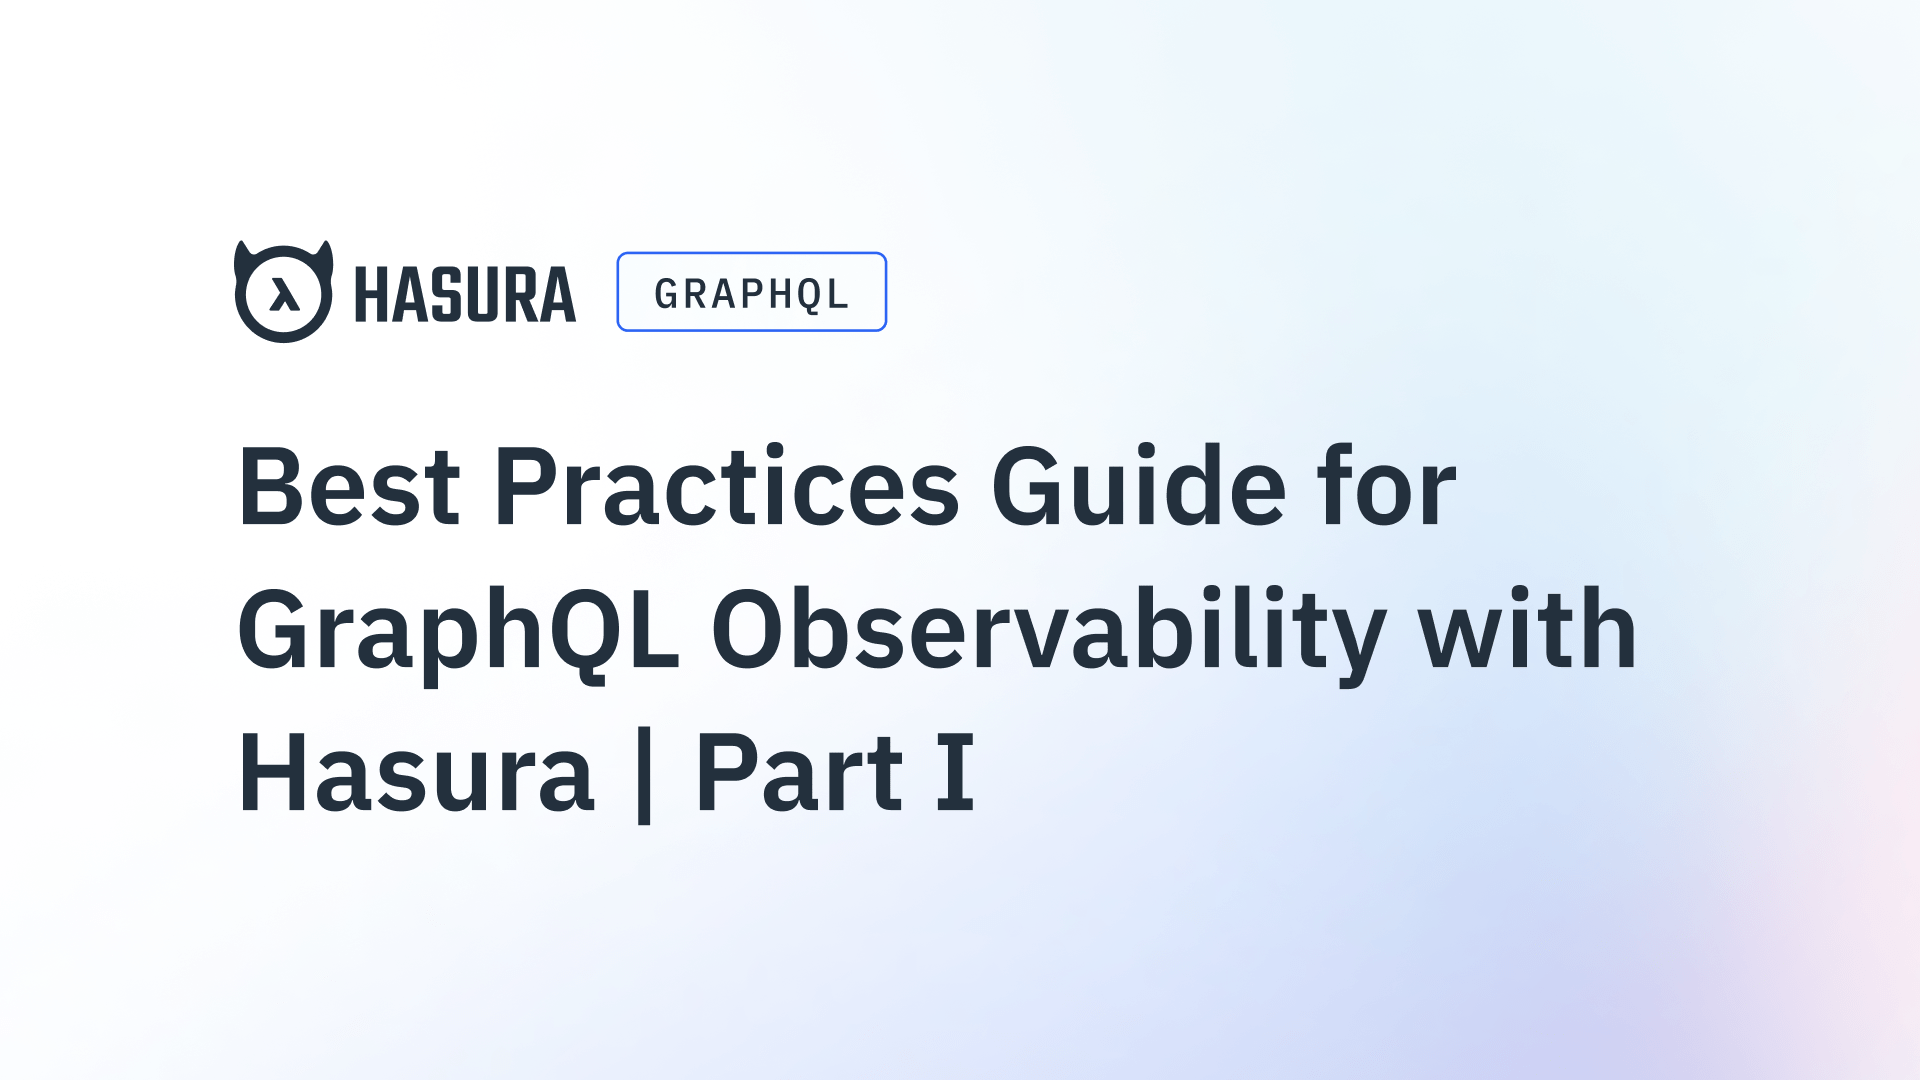 Best Practices Guide for GraphQL Observability with Hasura [Part 1]